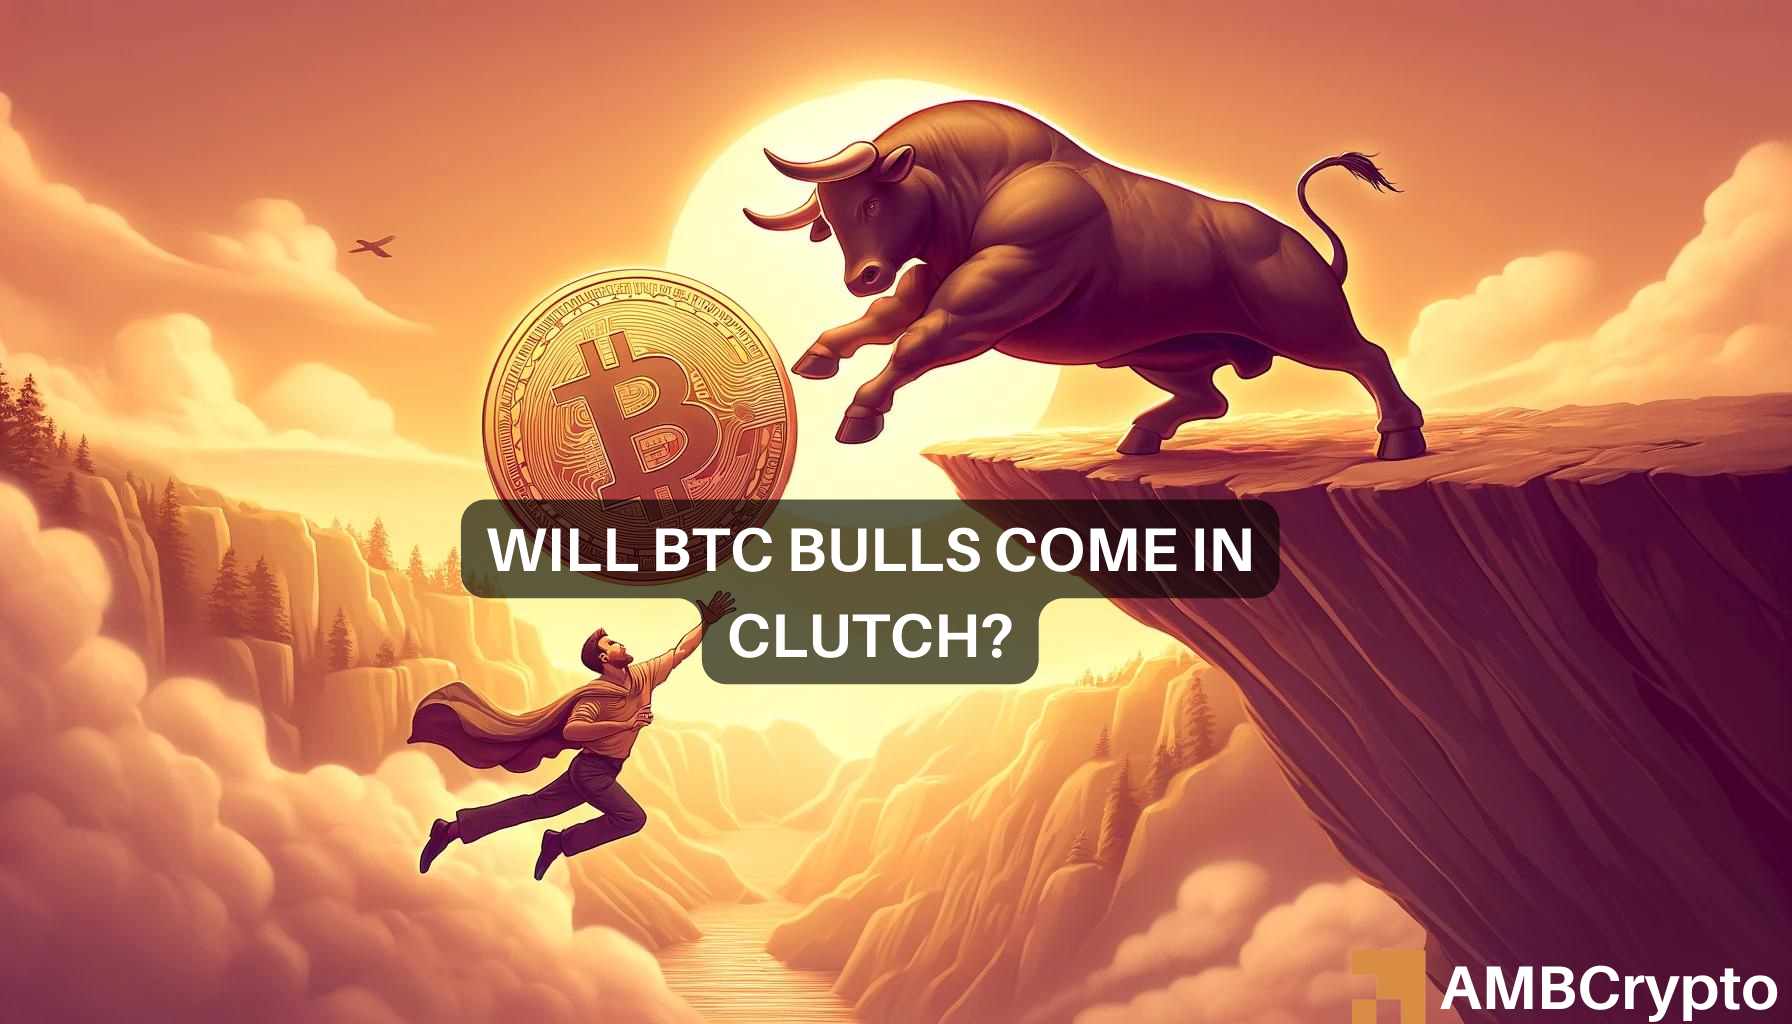  Is THIS the sign of a true bull run, or is it just a trap?